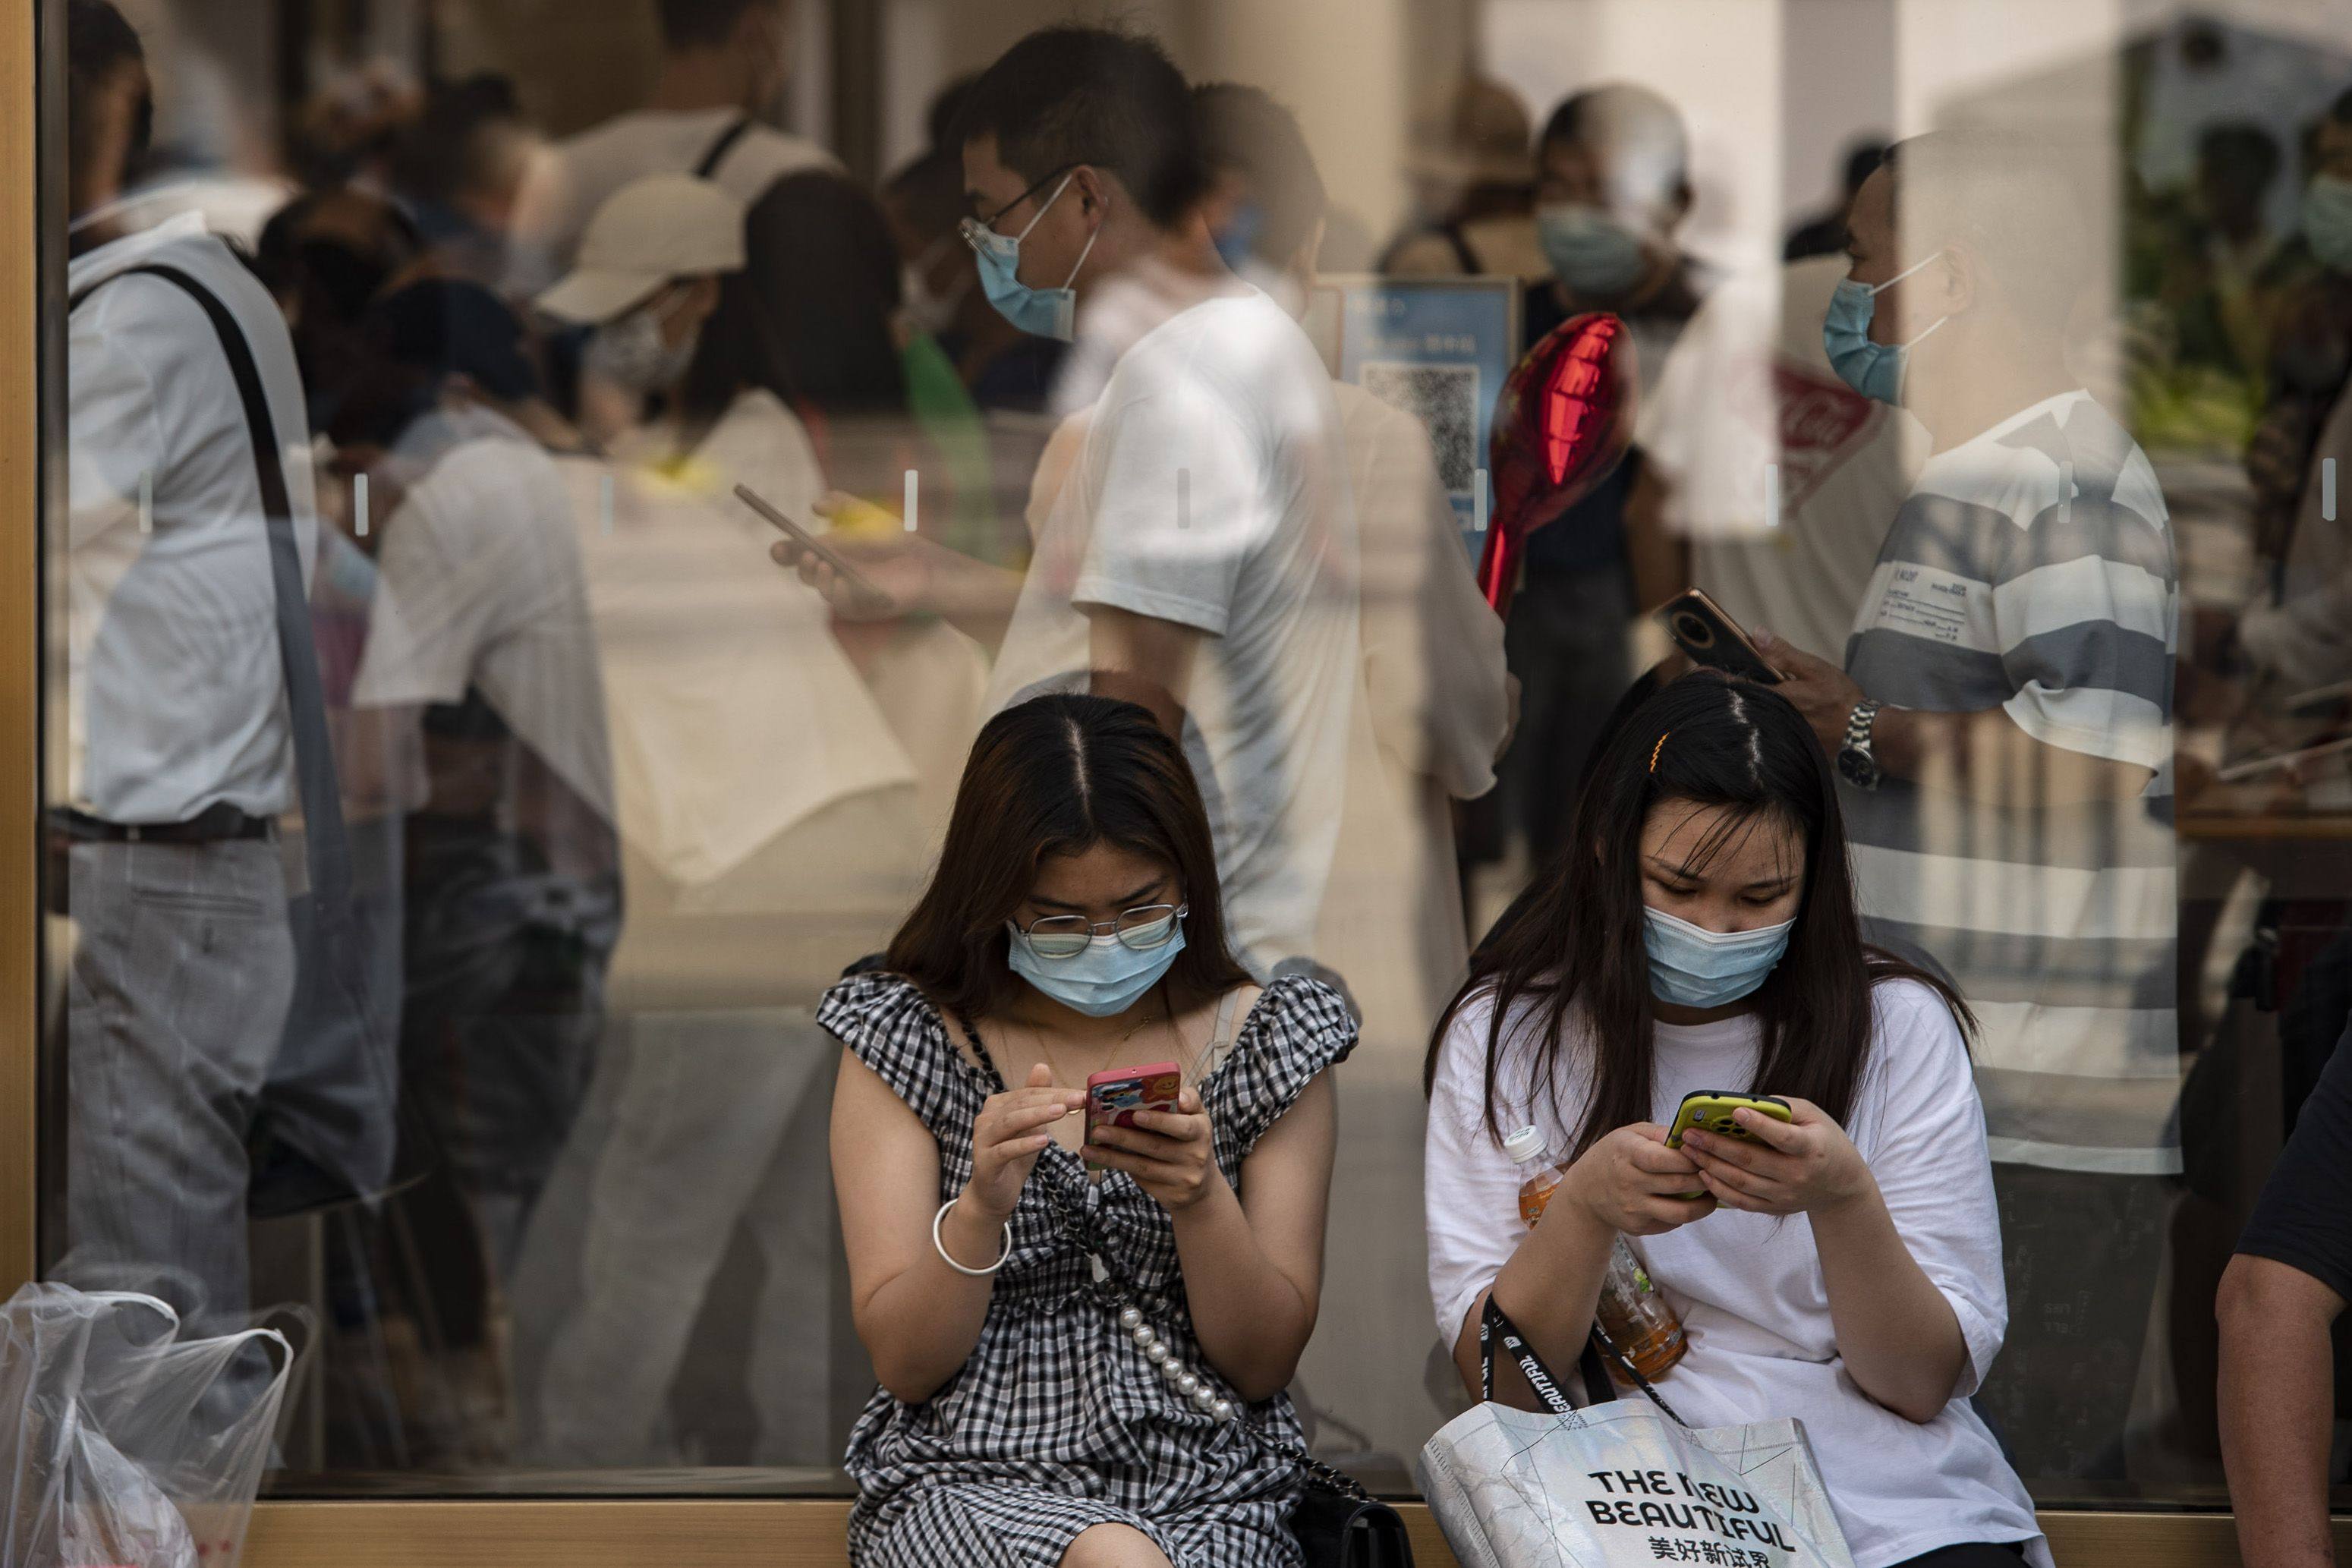 The Cyberspace Administration of China says it will guide websites and platforms on how to inspect content and accounts and promptly remove information identified as rumour or an infringement of entrepreneurs’ privacy. Photo: Bloomberg